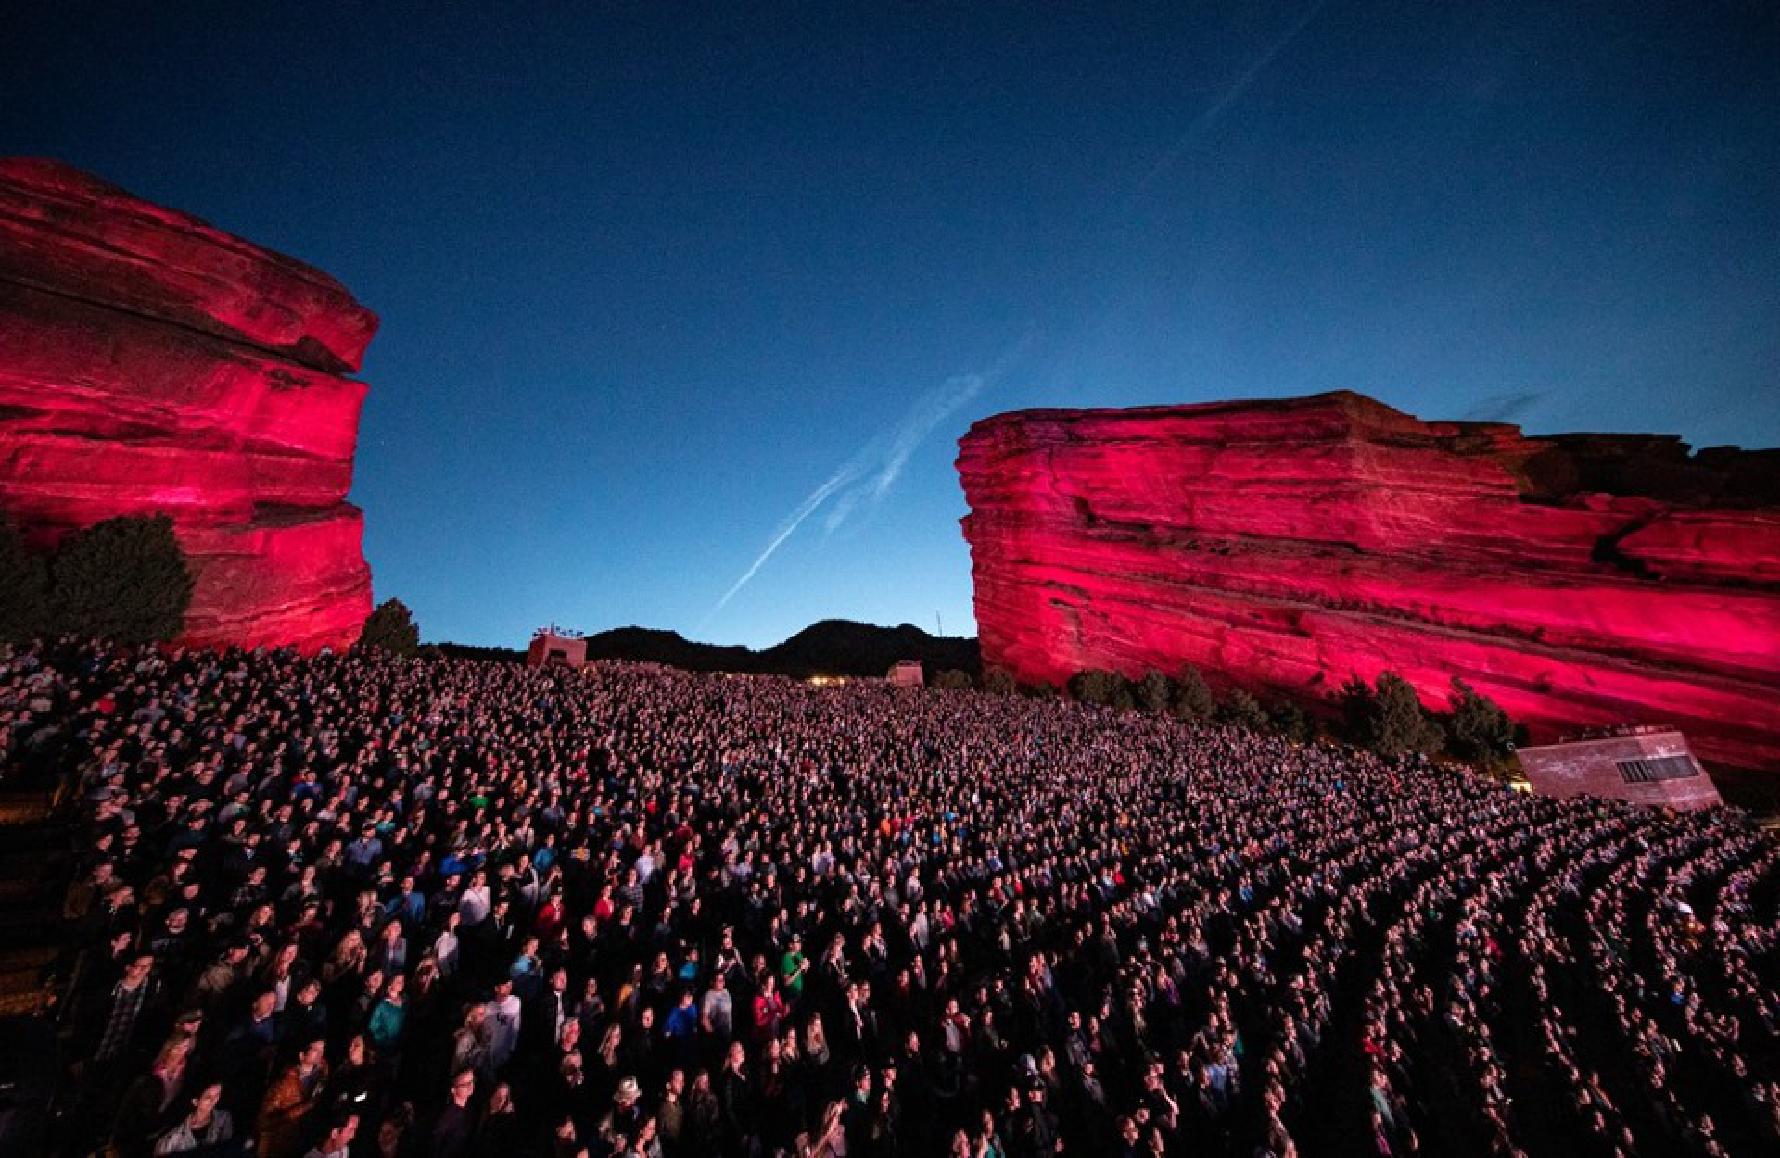 red rocks 2021 concert calendar Red Rocks Amphitheatre Tickets And Concerts 2020 2021 Wegow United States red rocks 2021 concert calendar